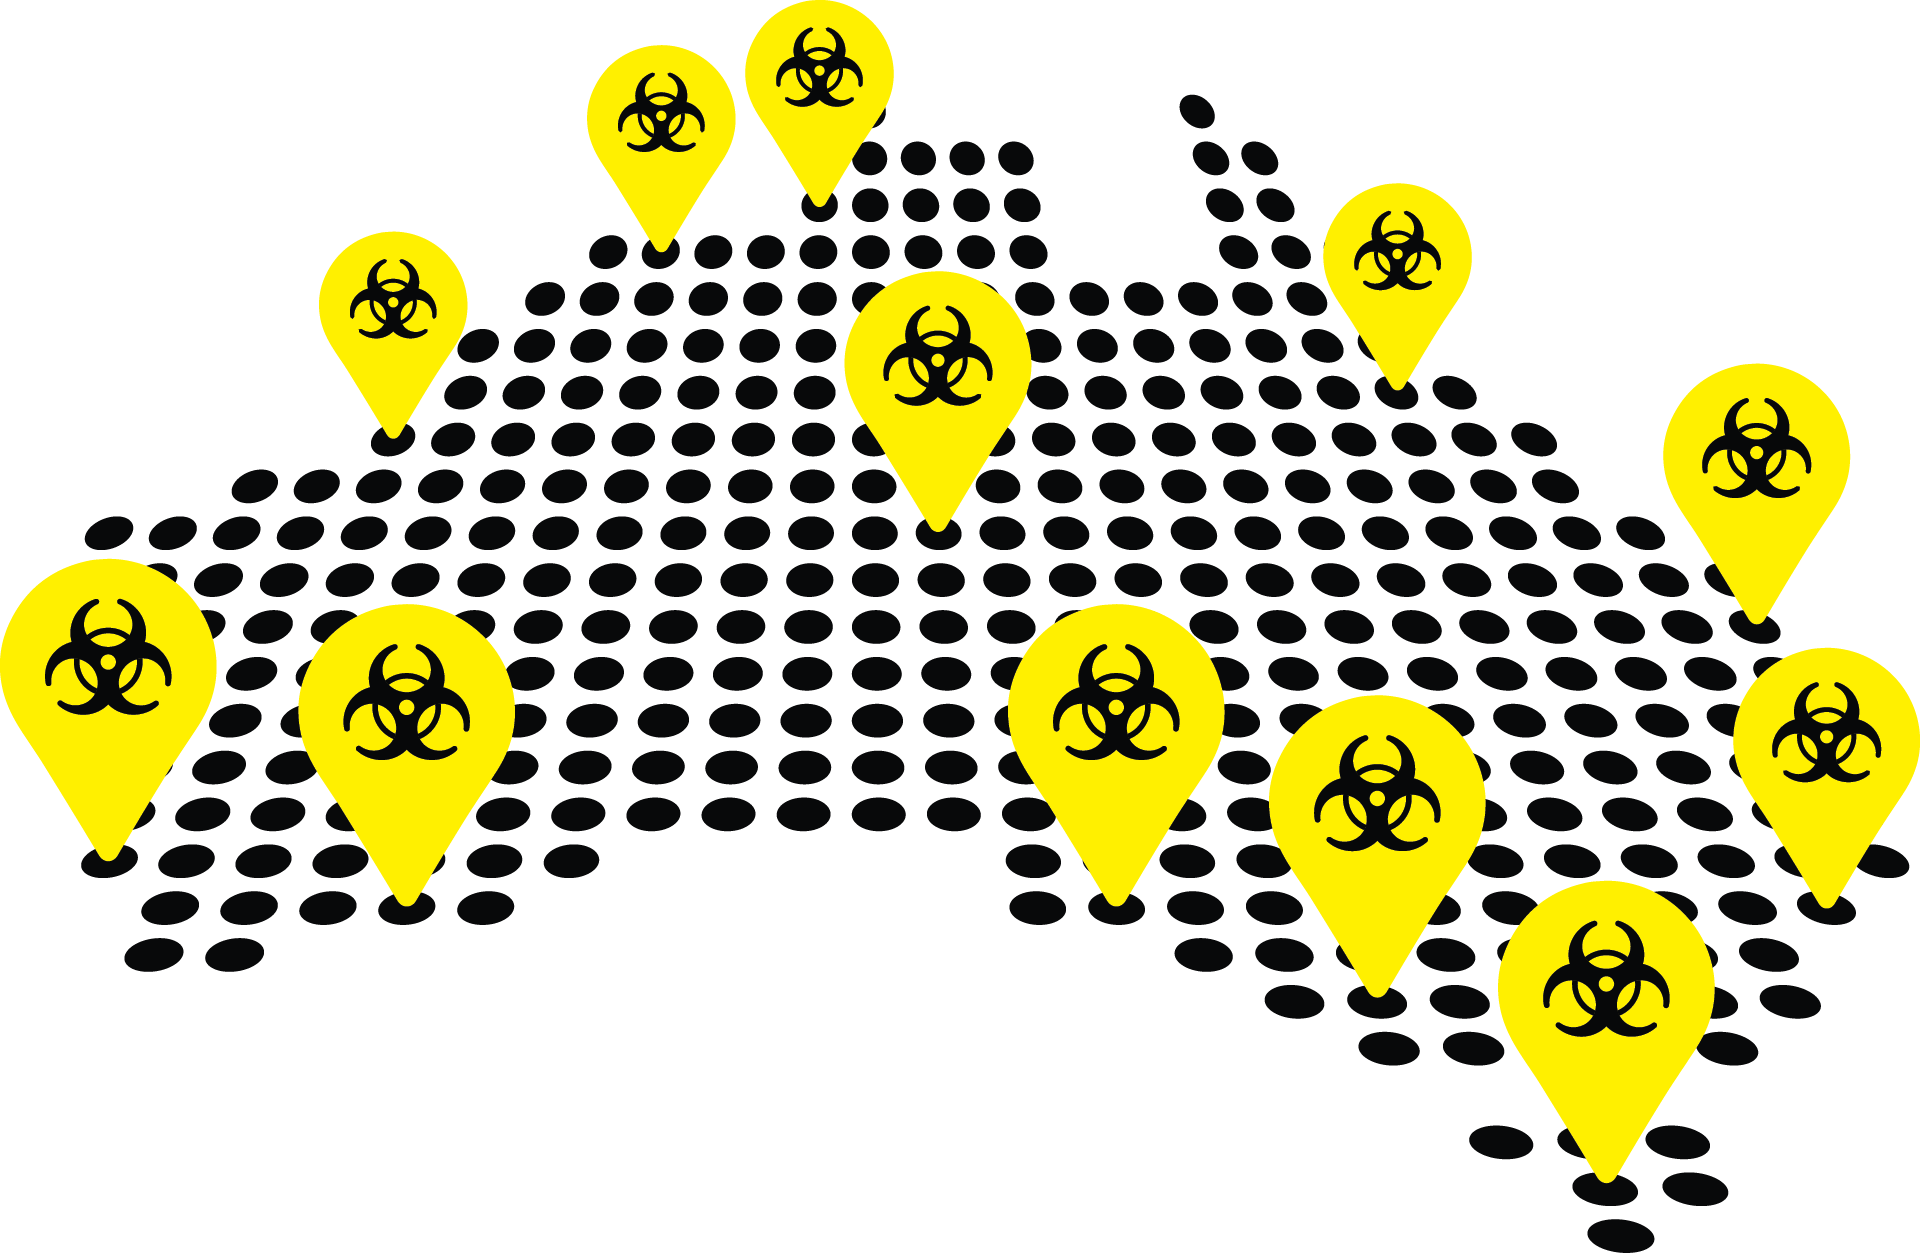 Map of Australia depicted as black dots with biohazard cleaning location pins all over